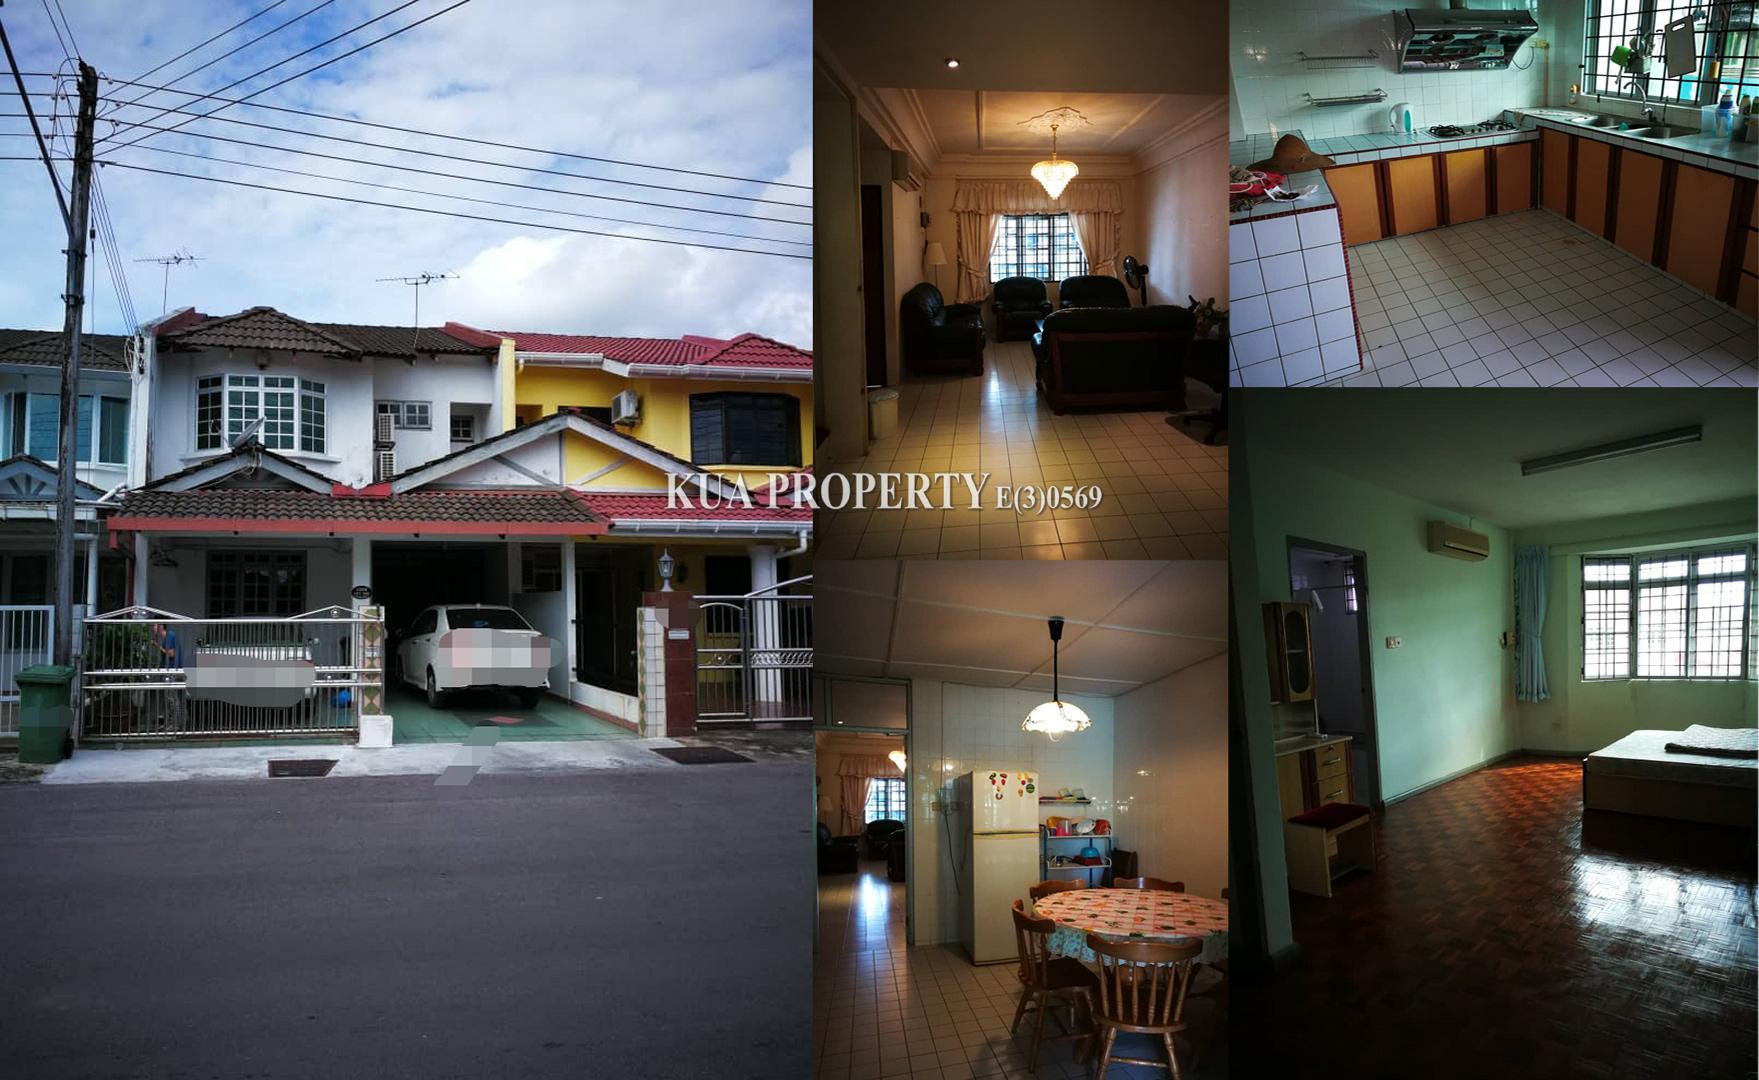 Double Storey Terrace Intermediate House For Rent! at BDC, Kuching